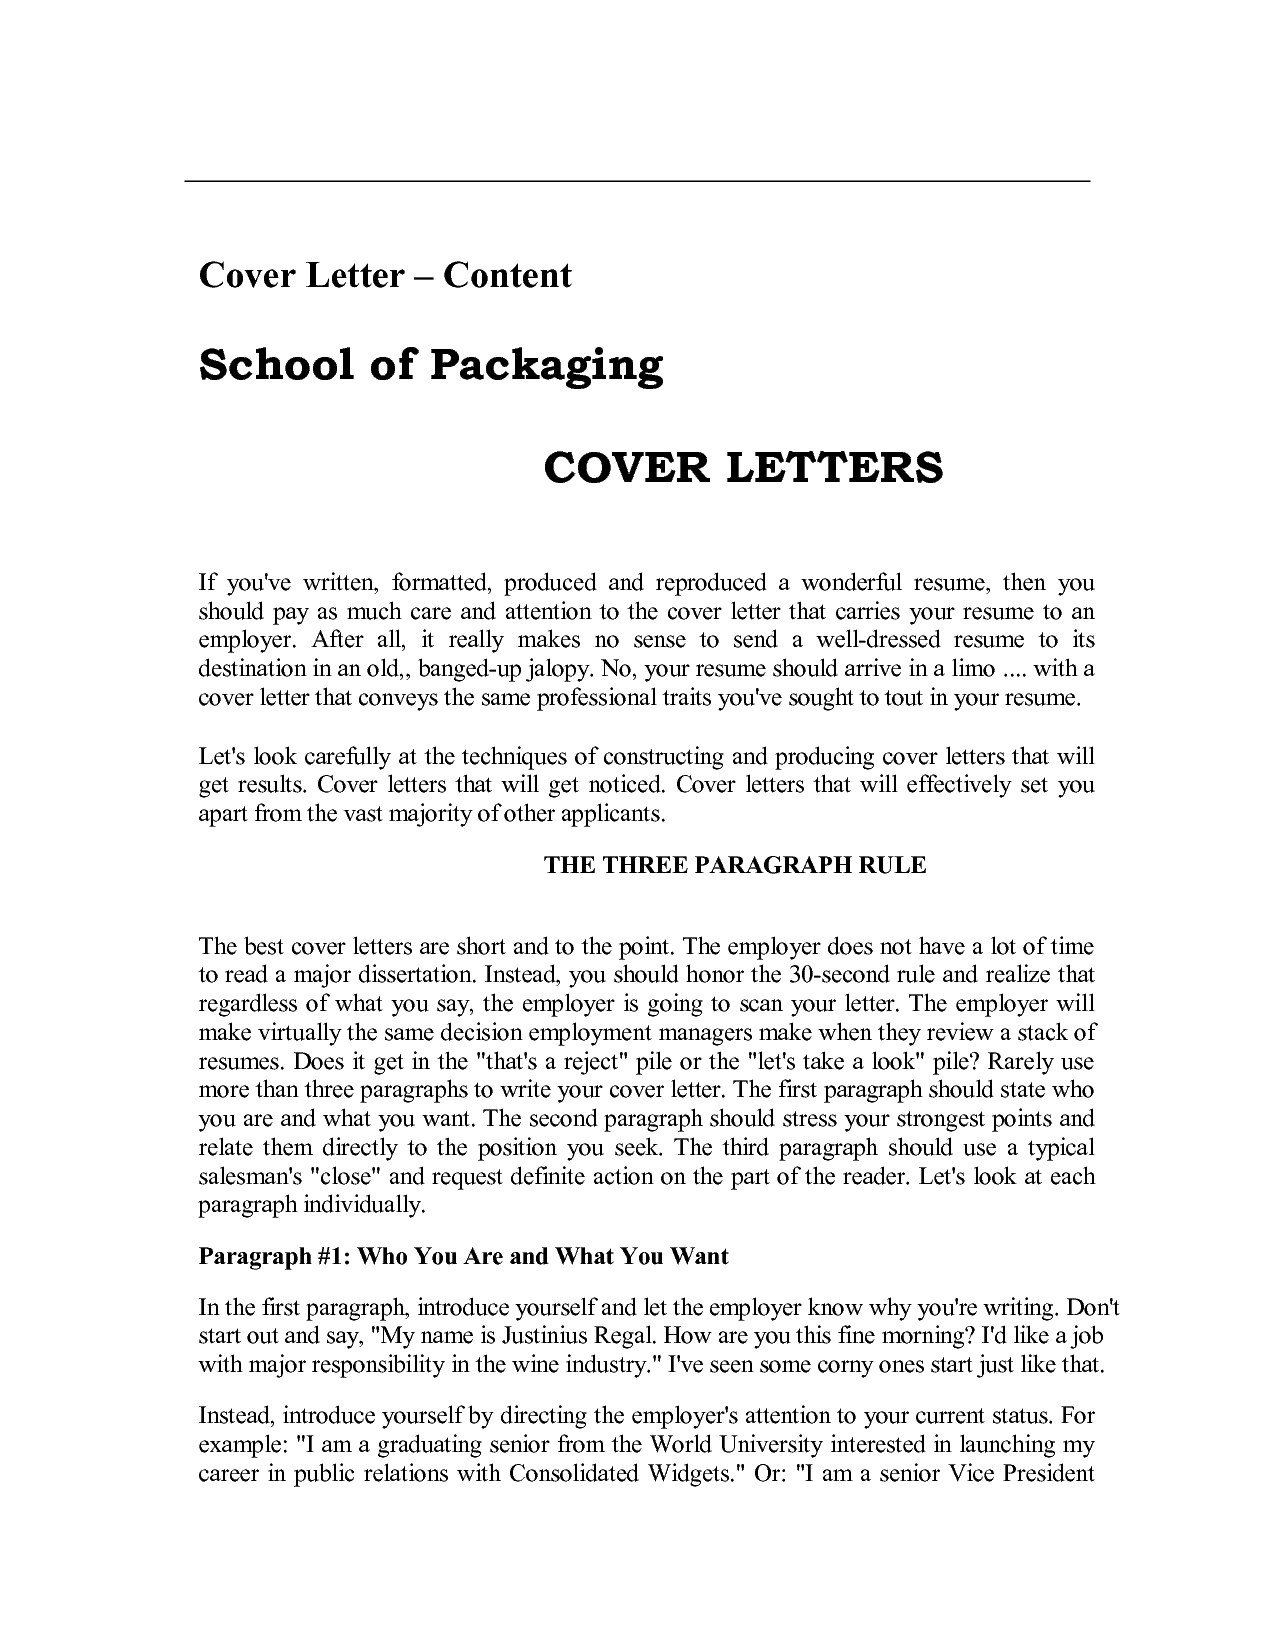 Cover Letters Pdf With ResumeCover Letter For Resume Cover